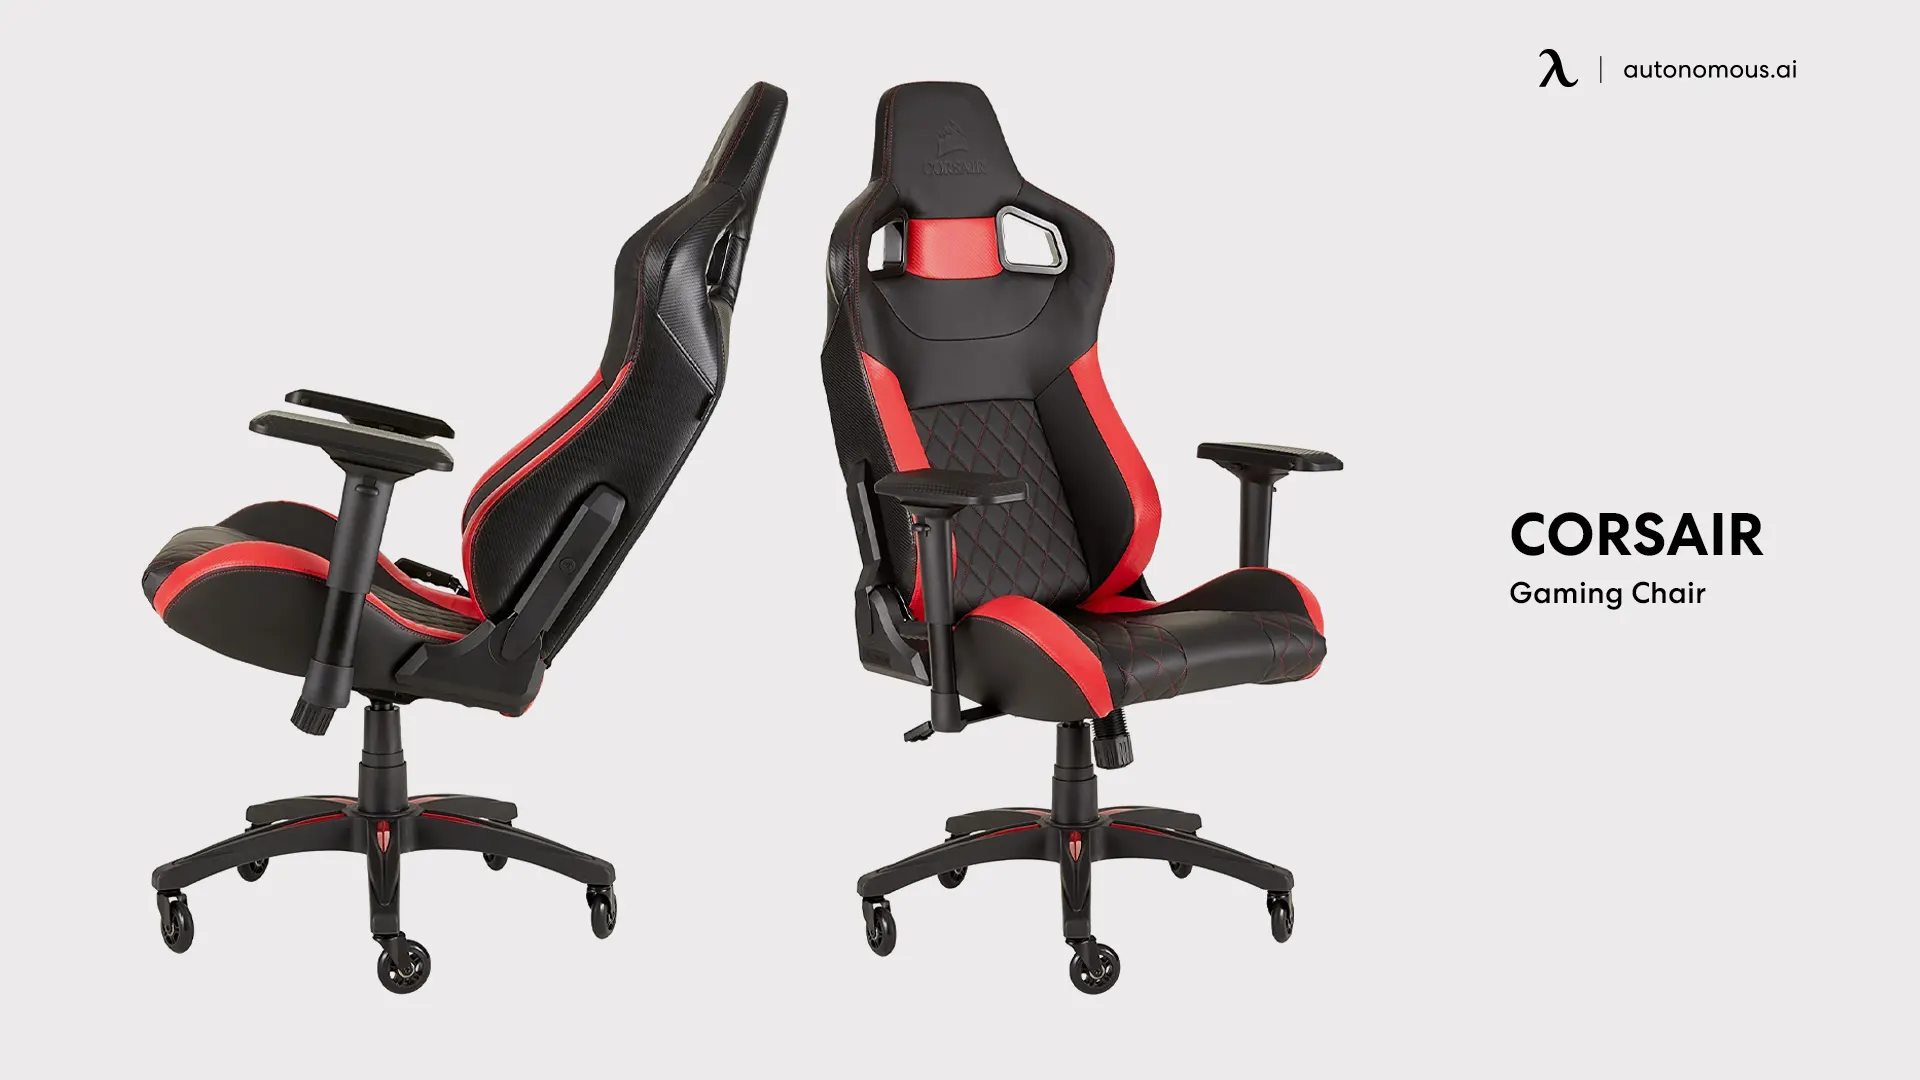 CORSAIR red gaming chair